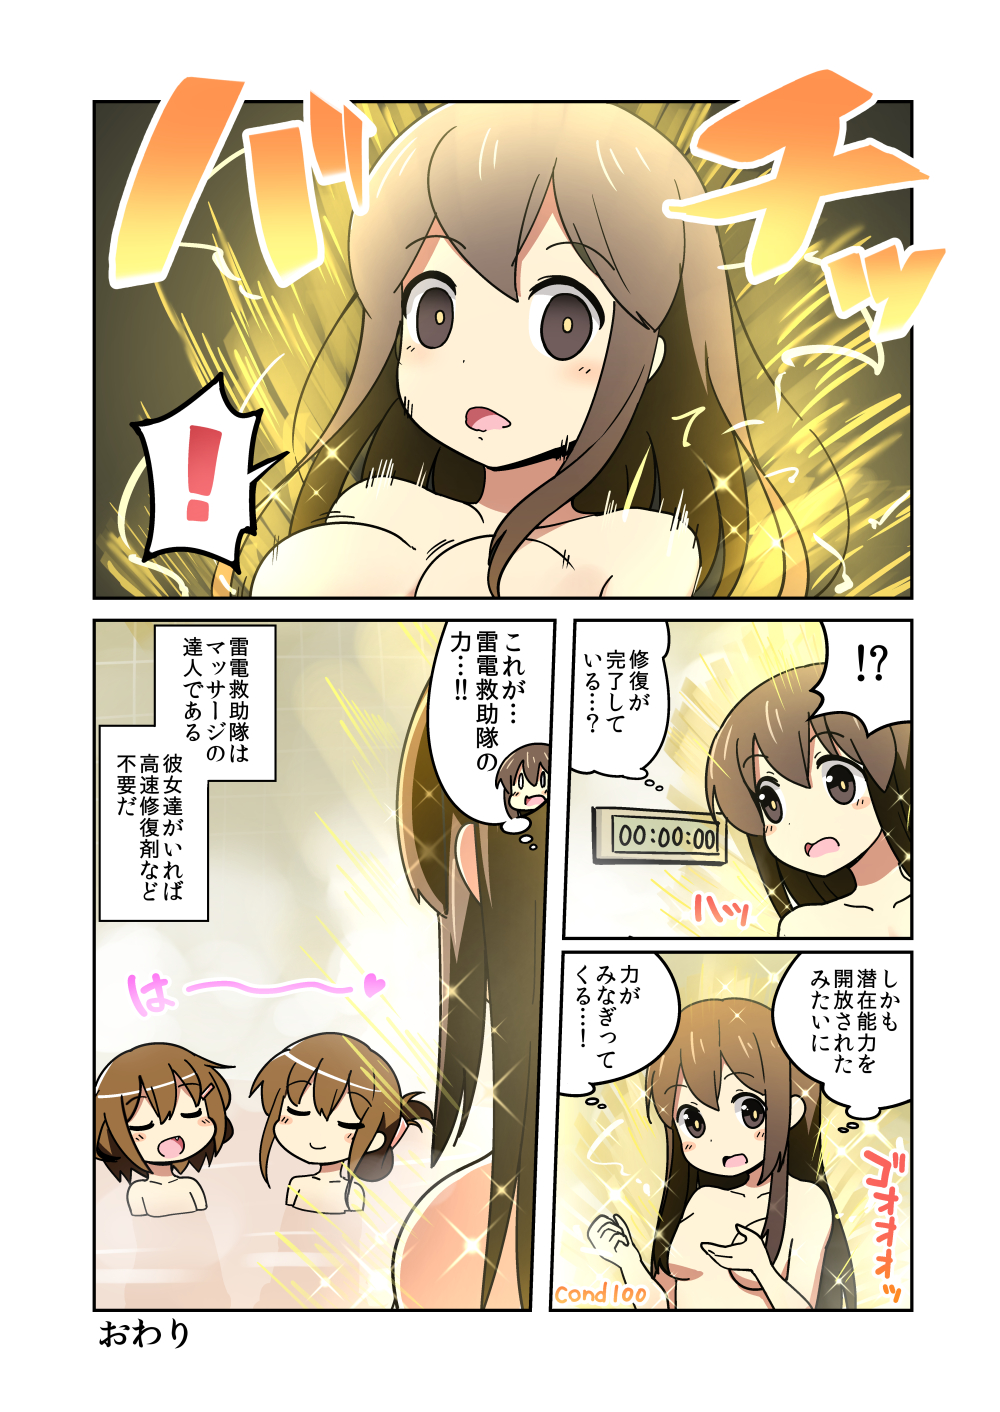 3girls akagi_(kantai_collection) bath bathing bell_(oppore_coppore) brown_eyes brown_hair closed_eyes comic countdown_timer fang folded_ponytail hair_ornament hairclip highres ikazuchi_(kantai_collection) inazuma_(kantai_collection) kantai_collection long_hair multiple_girls nude open_mouth short_hair smile sparkle translation_request